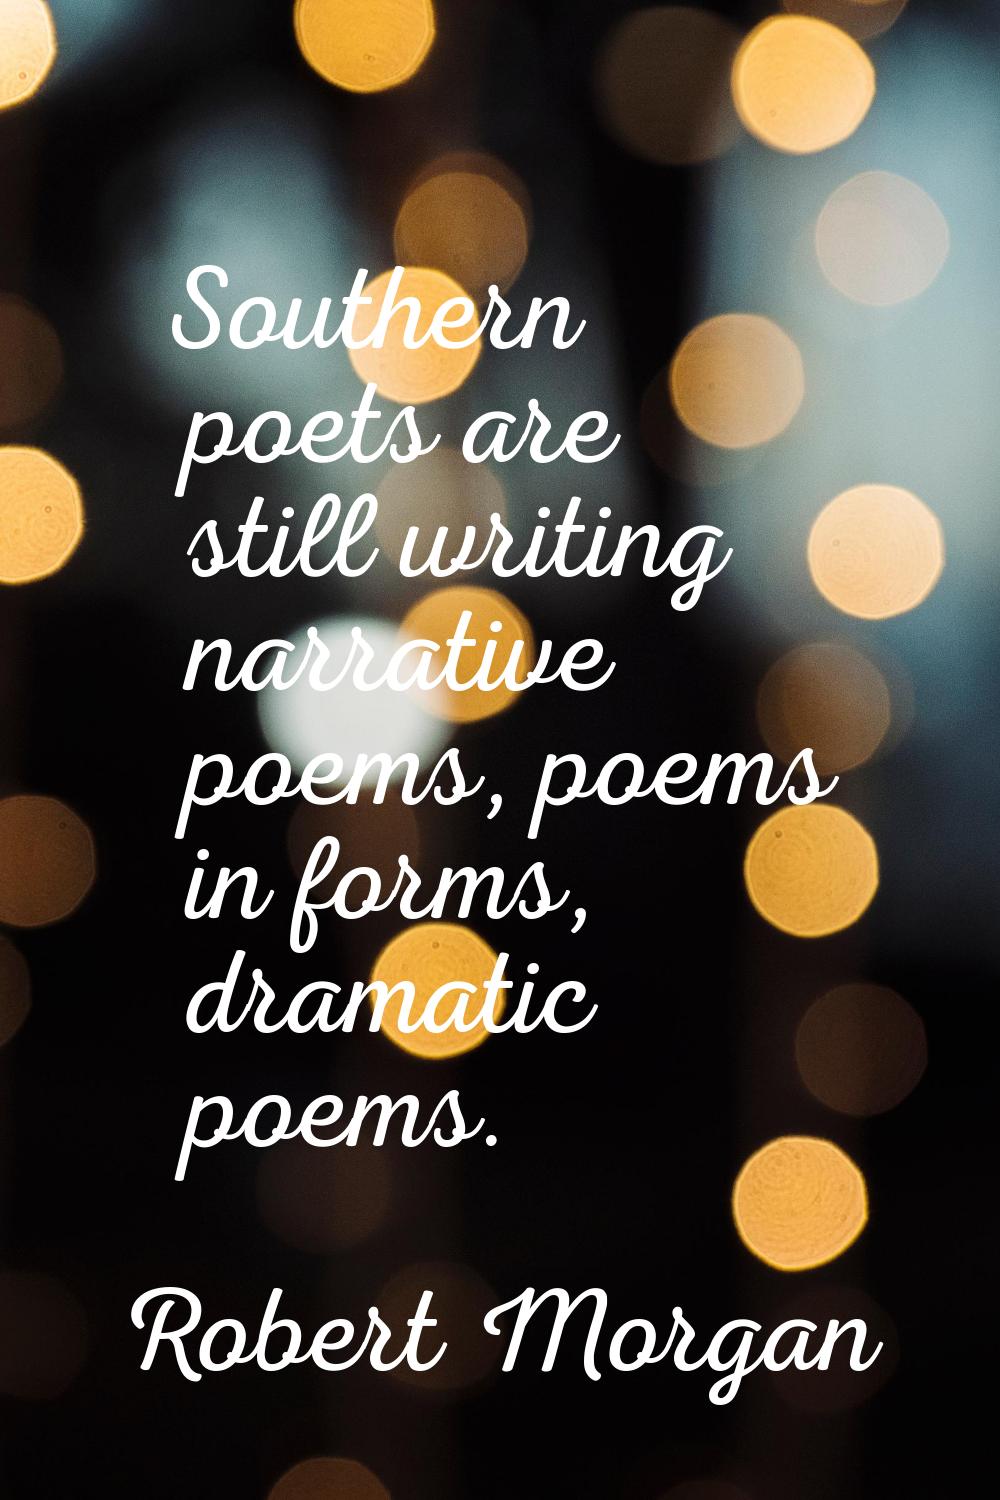 Southern poets are still writing narrative poems, poems in forms, dramatic poems.